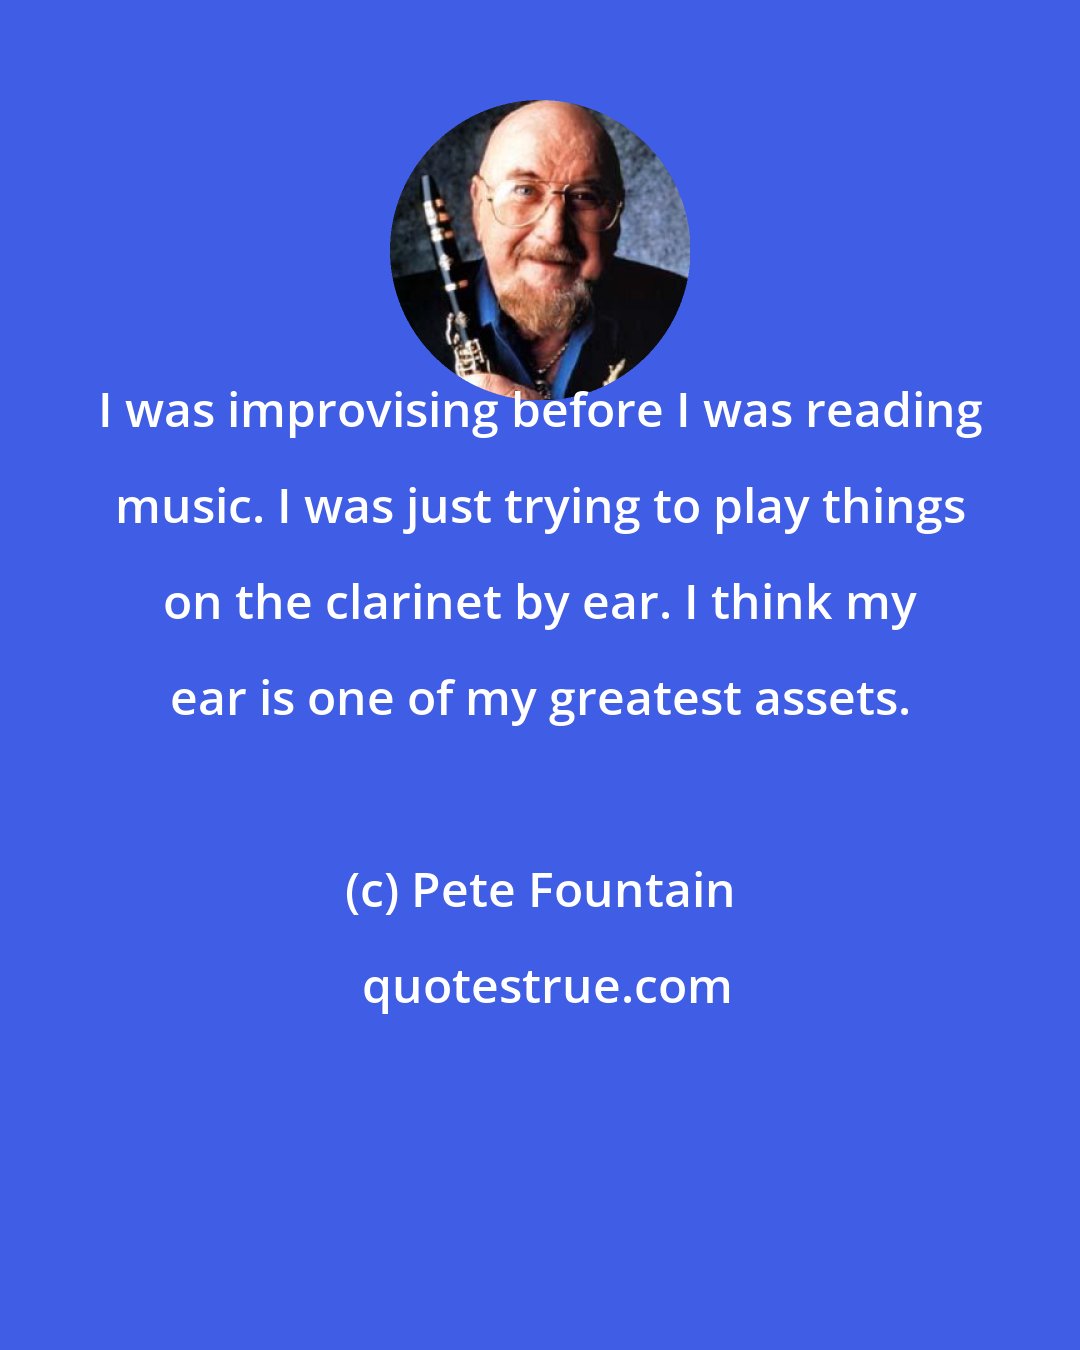 Pete Fountain: I was improvising before I was reading music. I was just trying to play things on the clarinet by ear. I think my ear is one of my greatest assets.